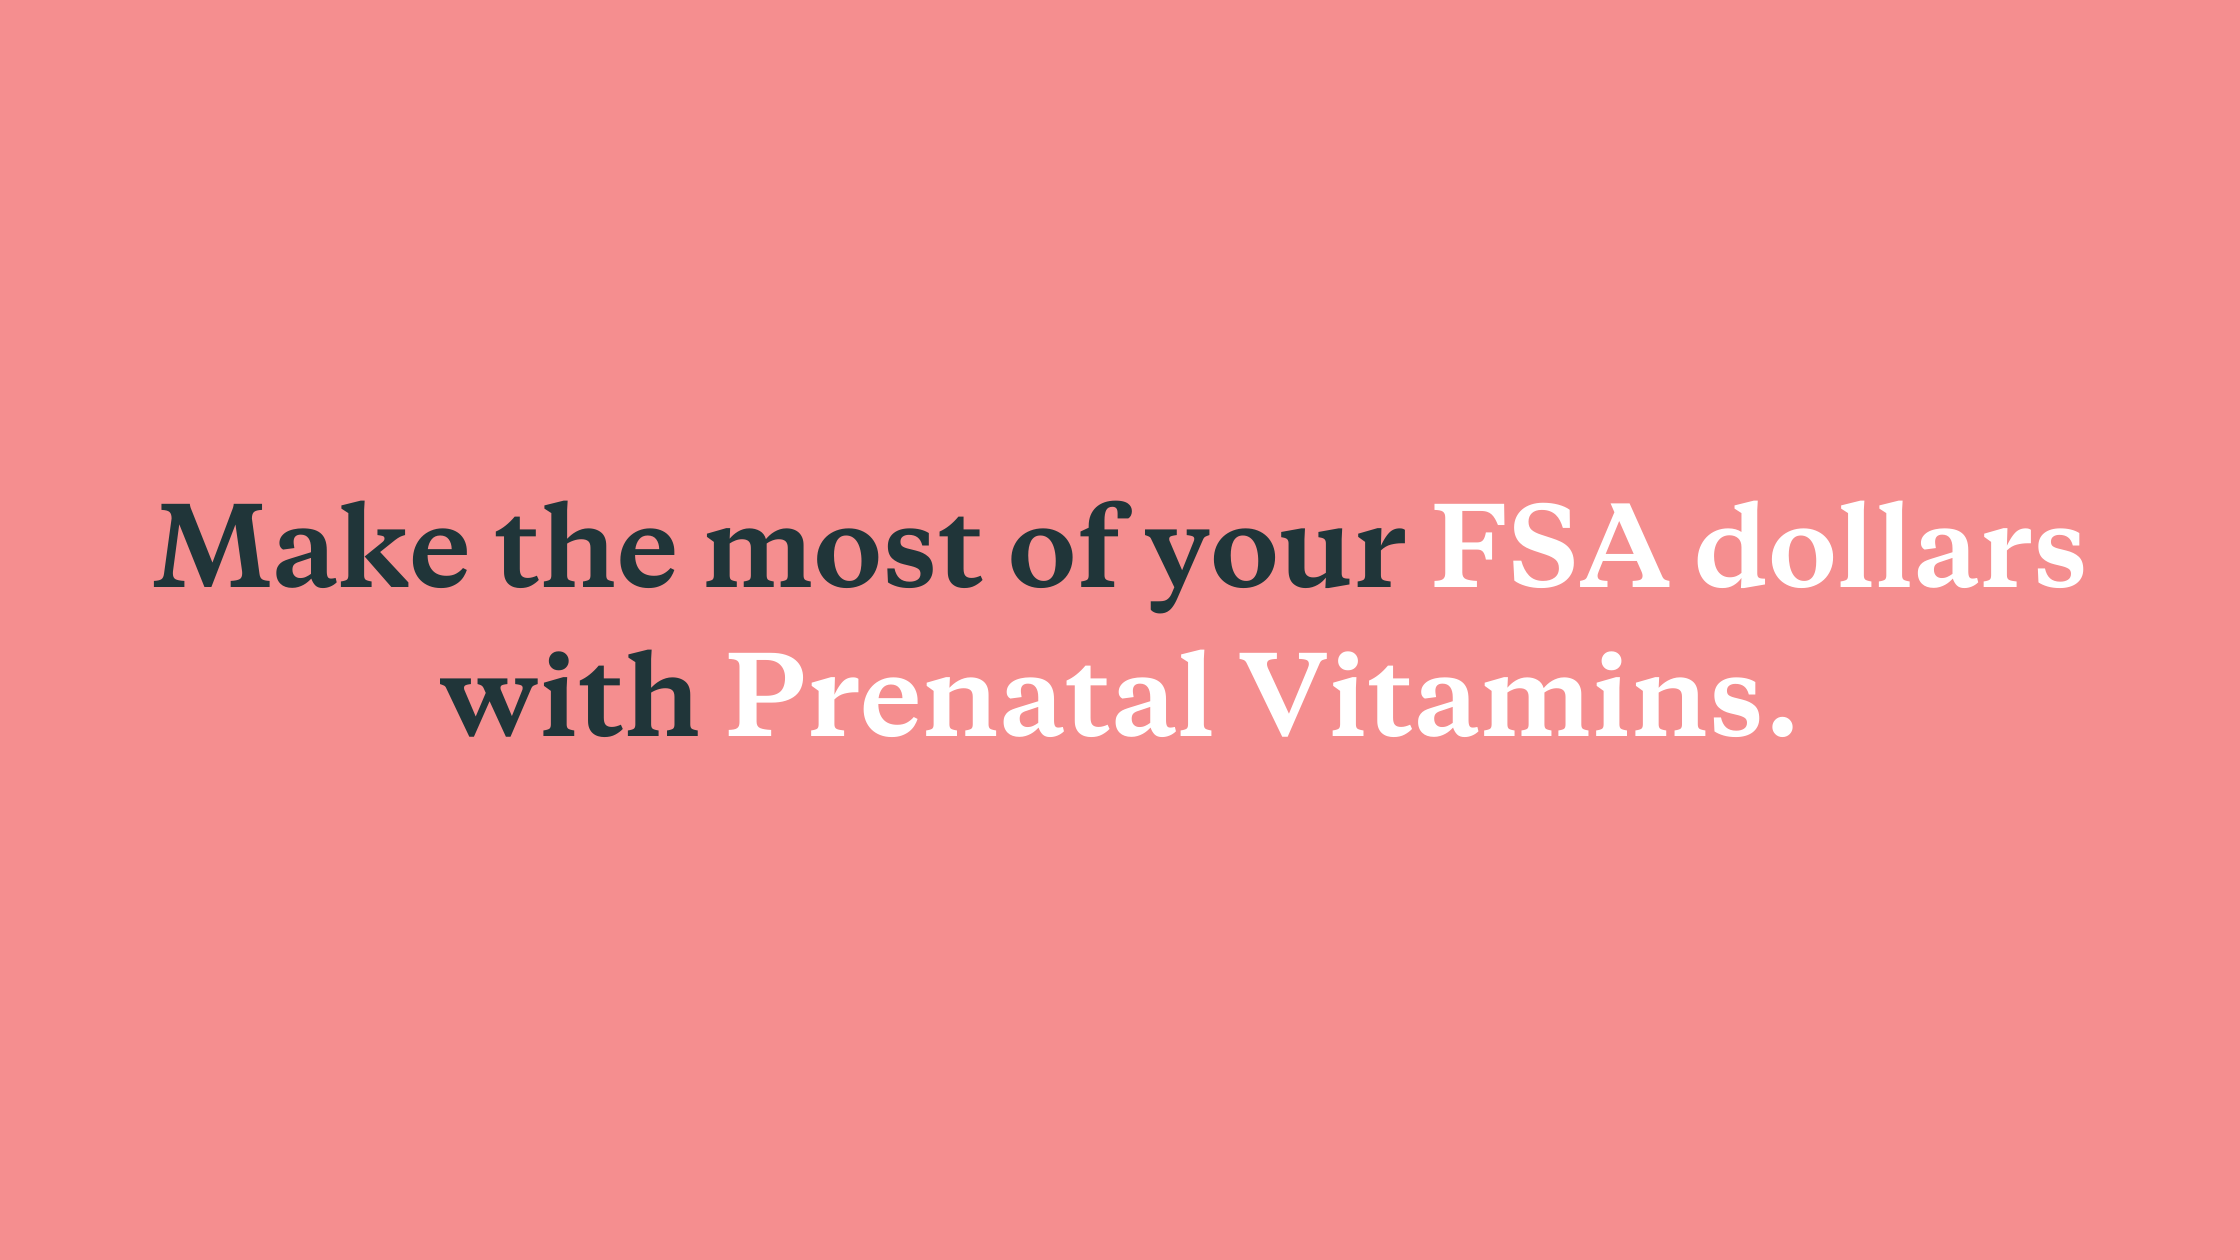 Are Vitamins FSA/HSA Eligible? It Depends